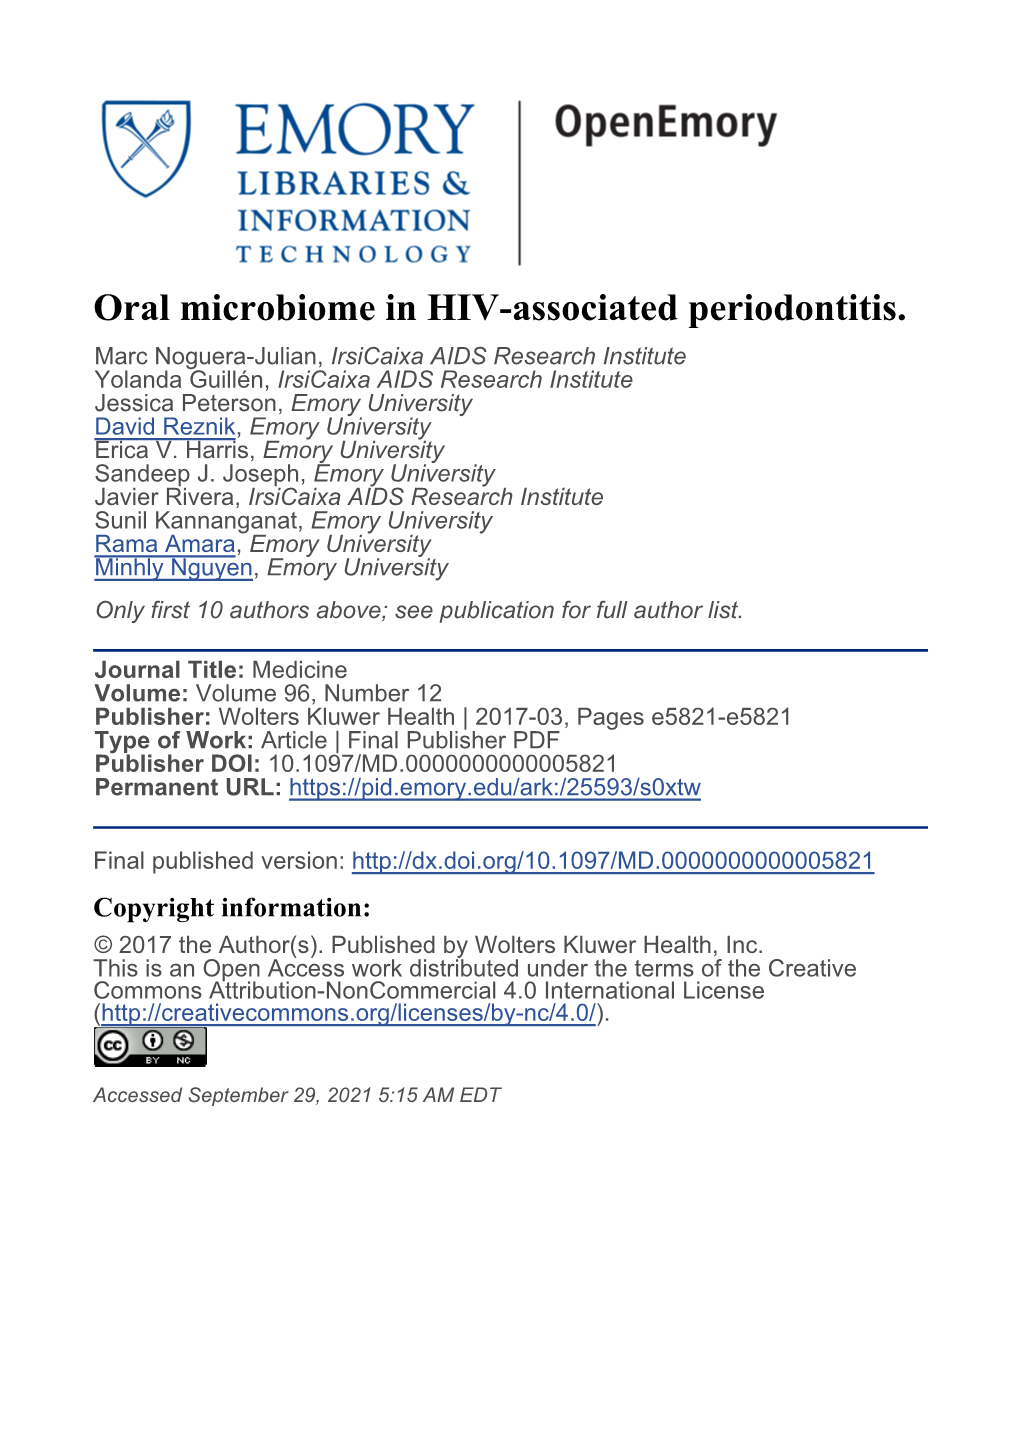 Oral Microbiome in HIV-Associated Periodontitis